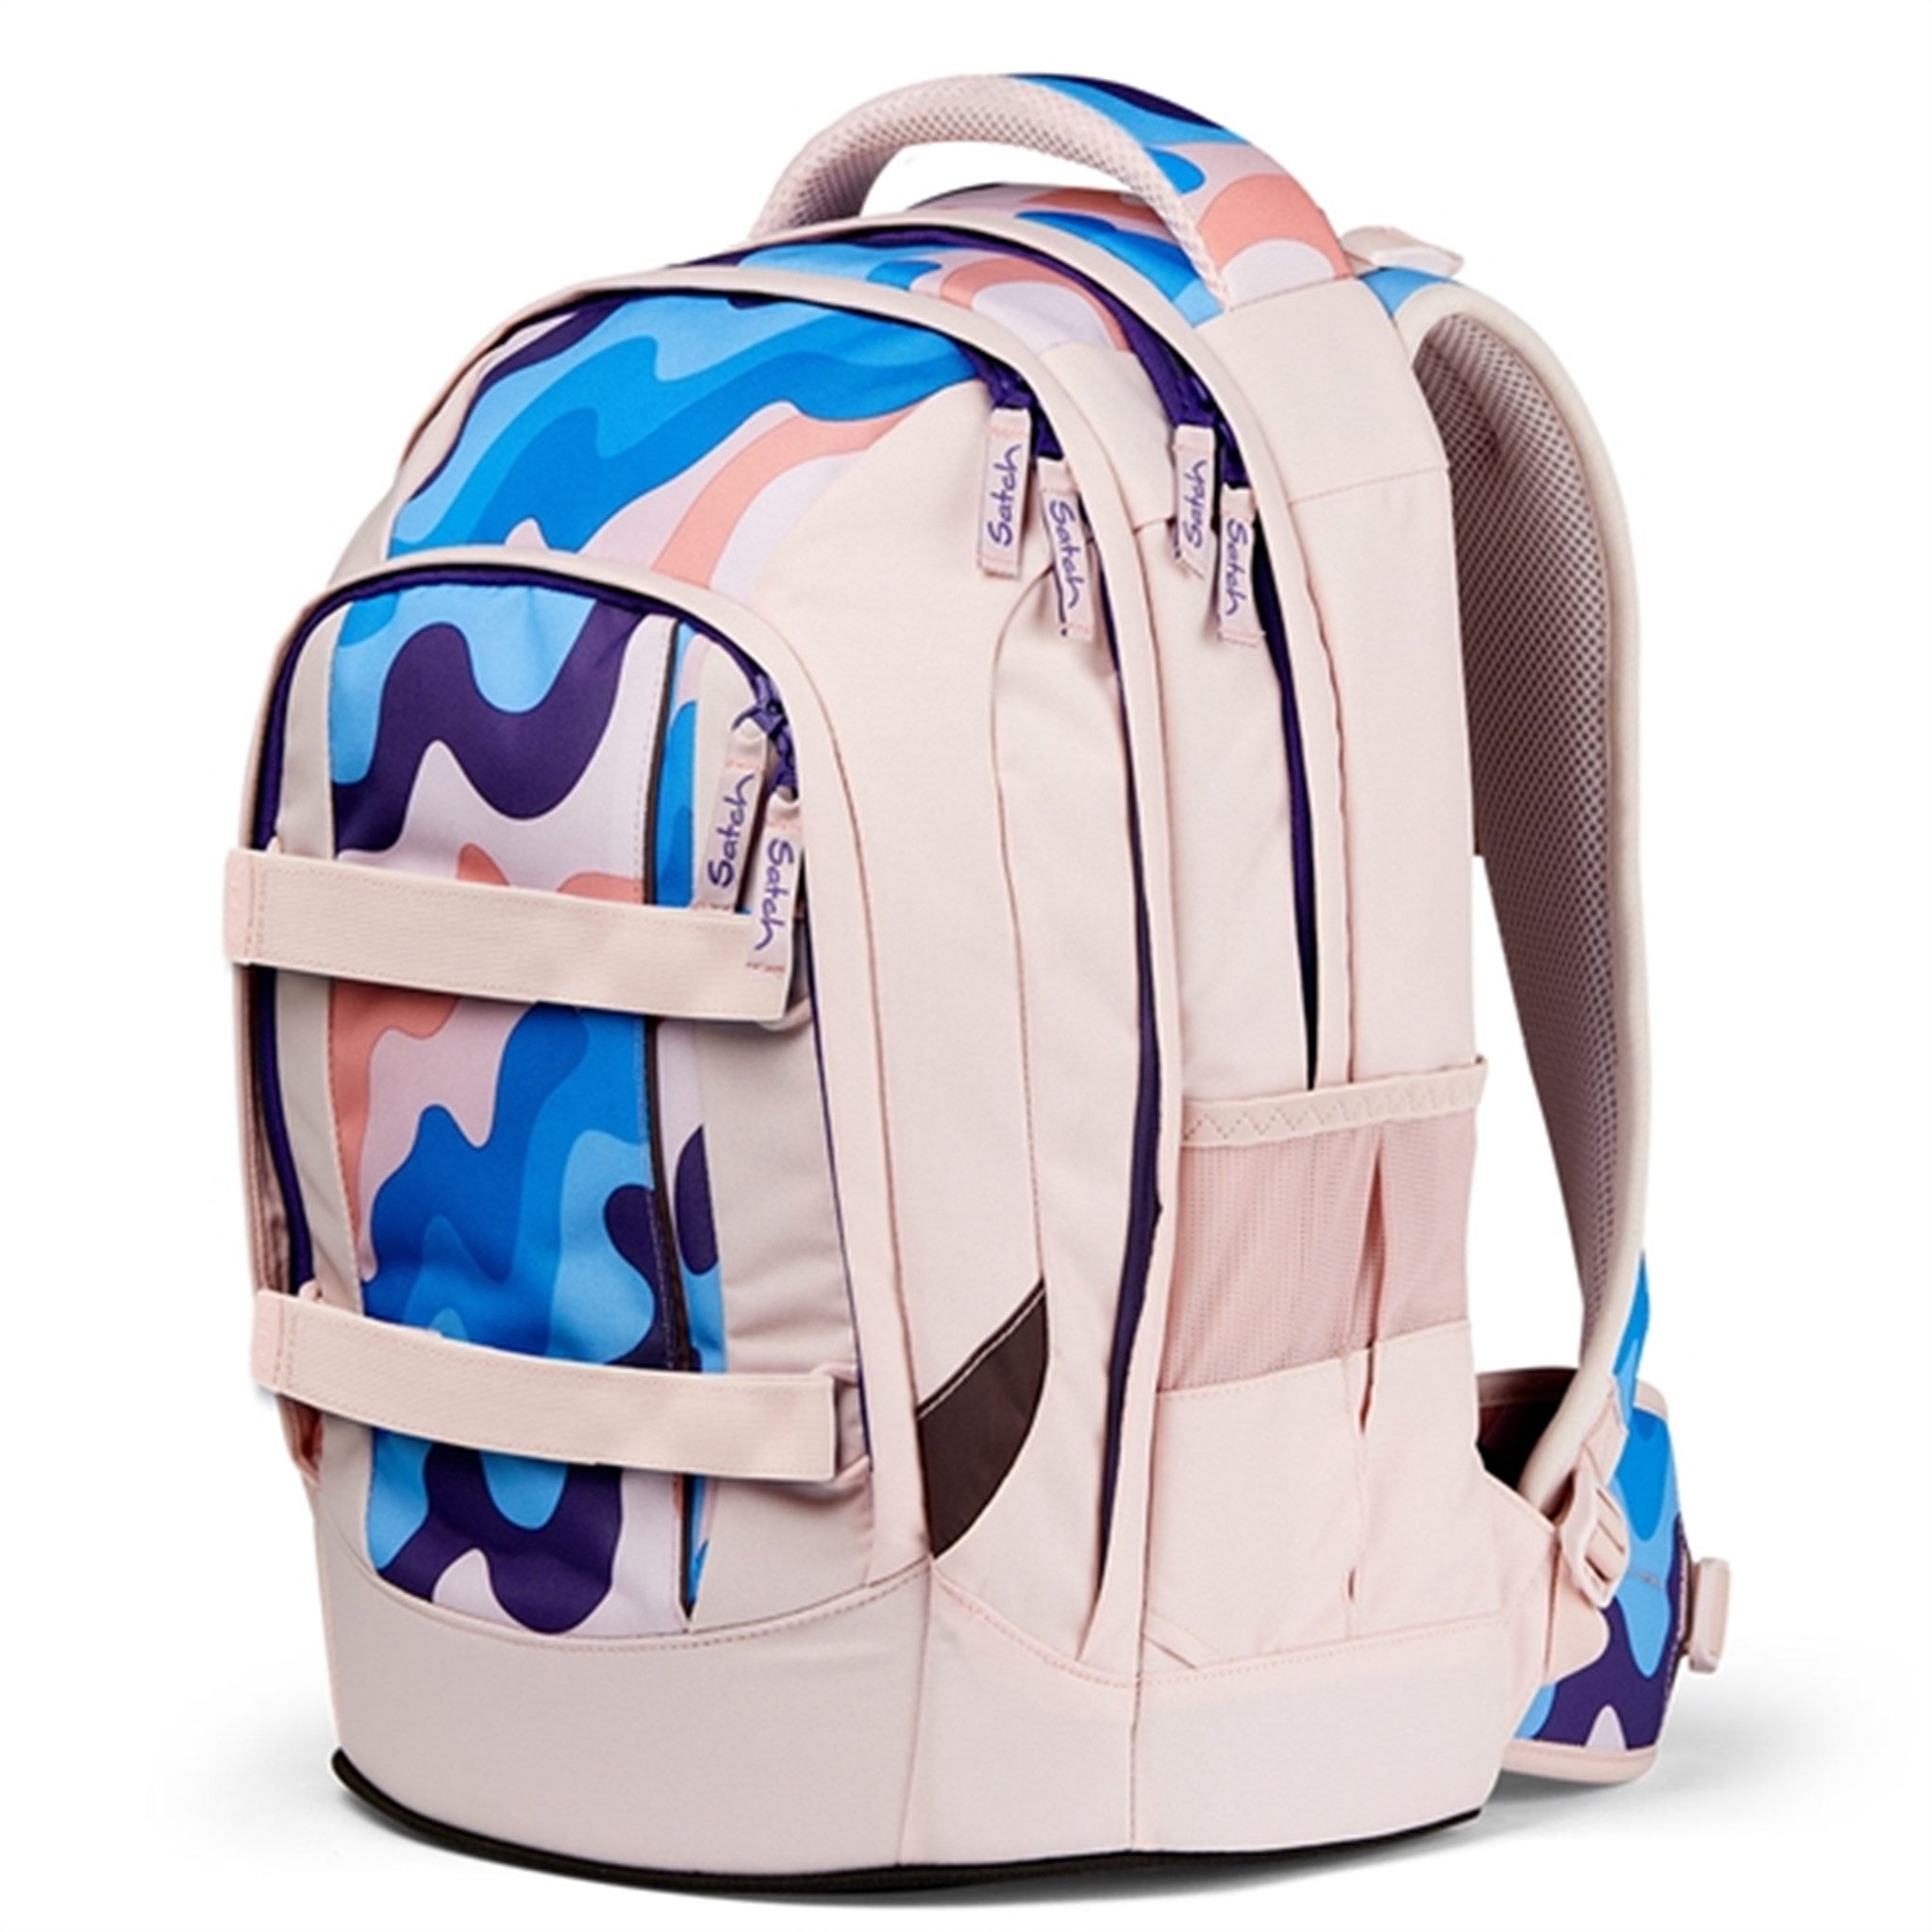 Satch Pack School Bag Candy Clouds 7